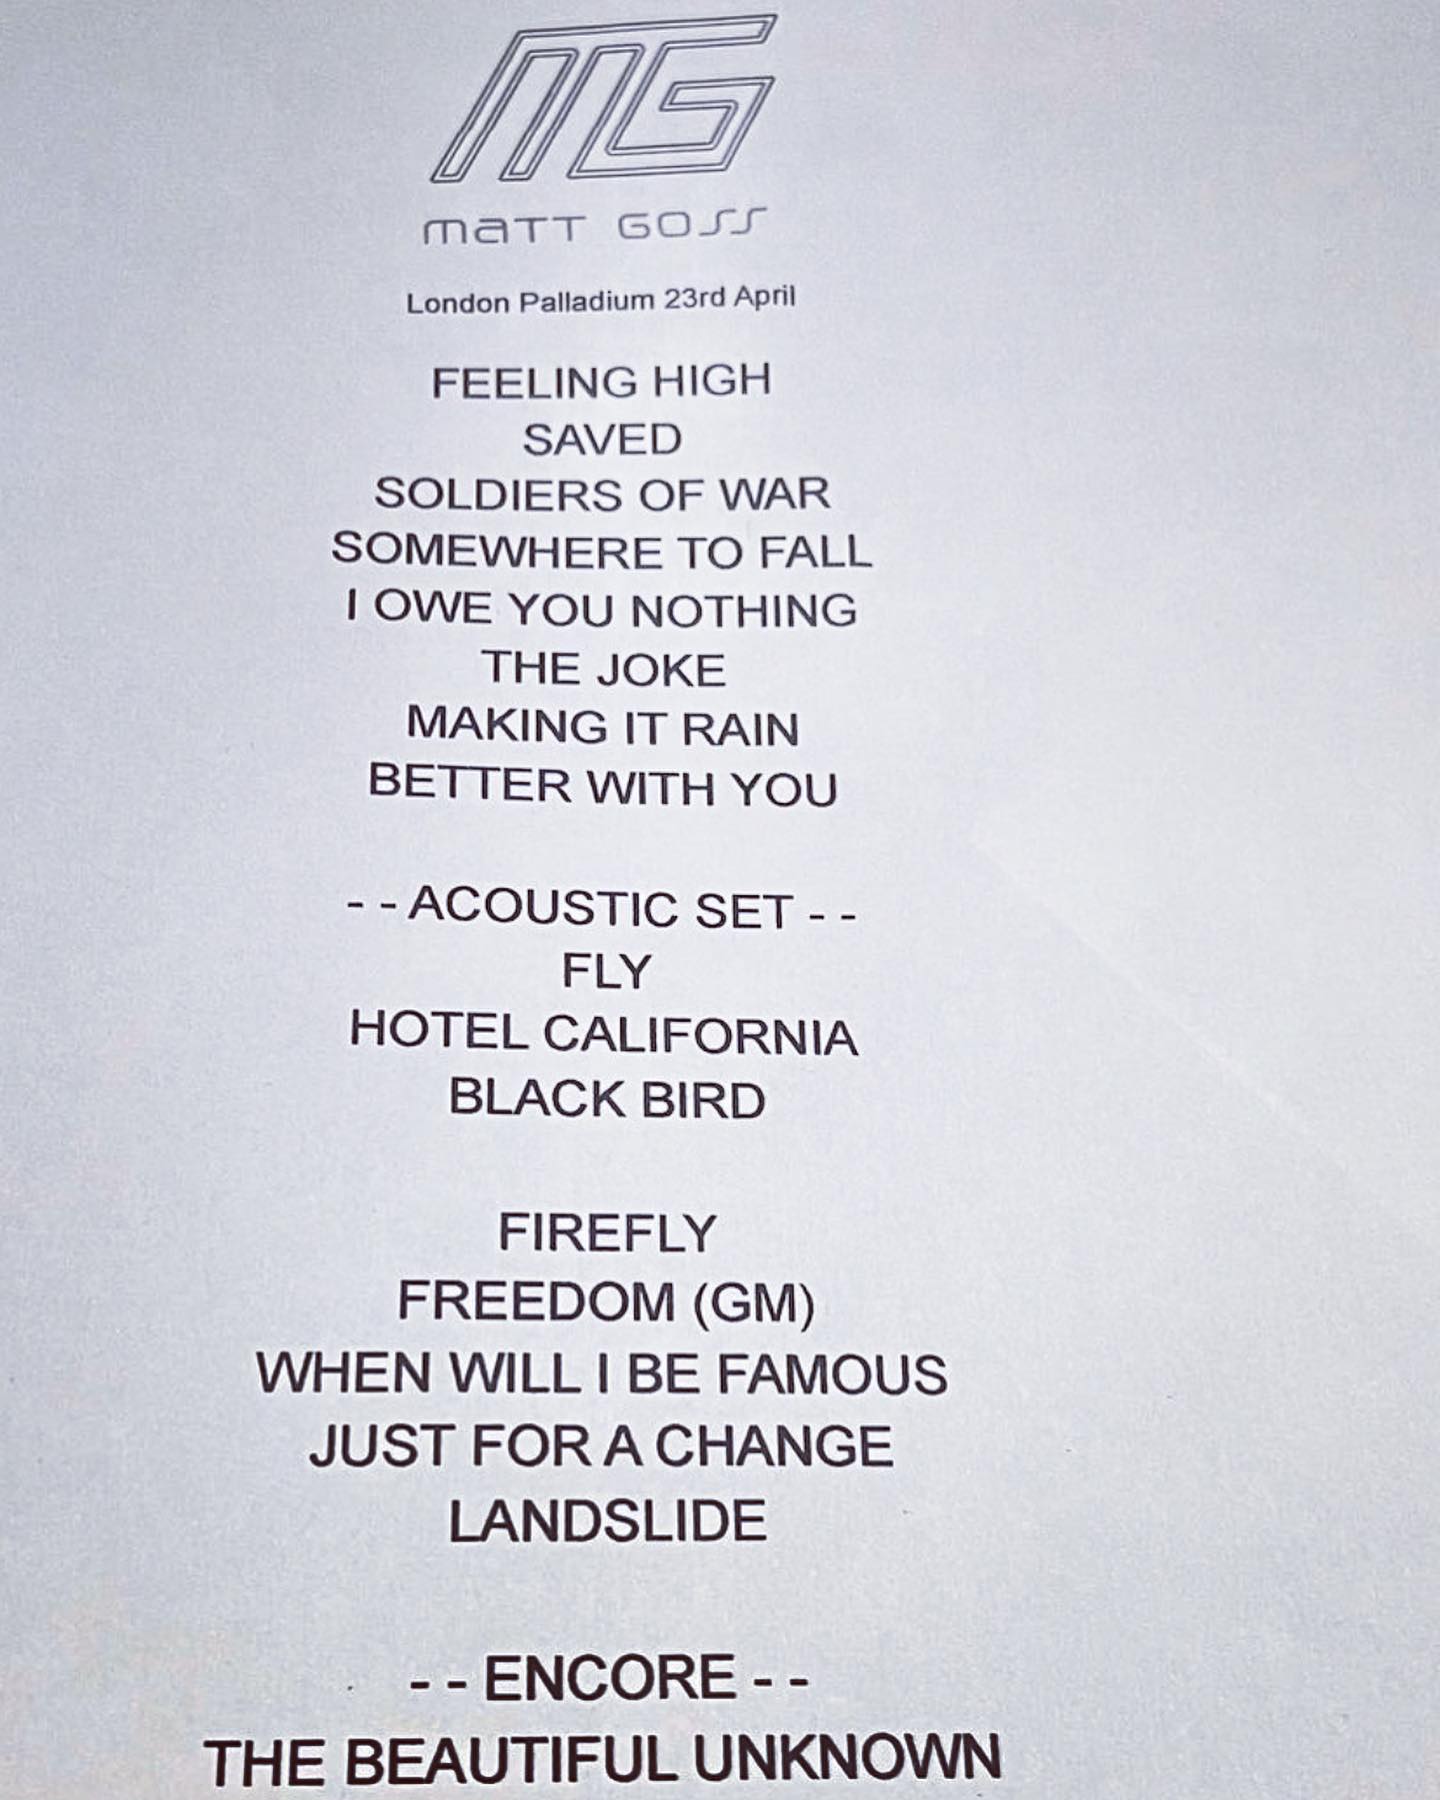 The set list for @mattgoss show at The London Palladium. This was the best show I have been to. Hearing the new songs off Matt’s new album sung live are incredible.
Thank you for an amazing night MG

#mattgoss #bros #palladium #newmusic #music #singer #londonpalladium #songwriter #singersongwriter #instamusic #musician #musicartist #musiciansofinstagram #musicbusiness #musicindustry #fashion #newalbum #newsingle #somewheretofall #betterwithyou #thebeautifulunknown #saved